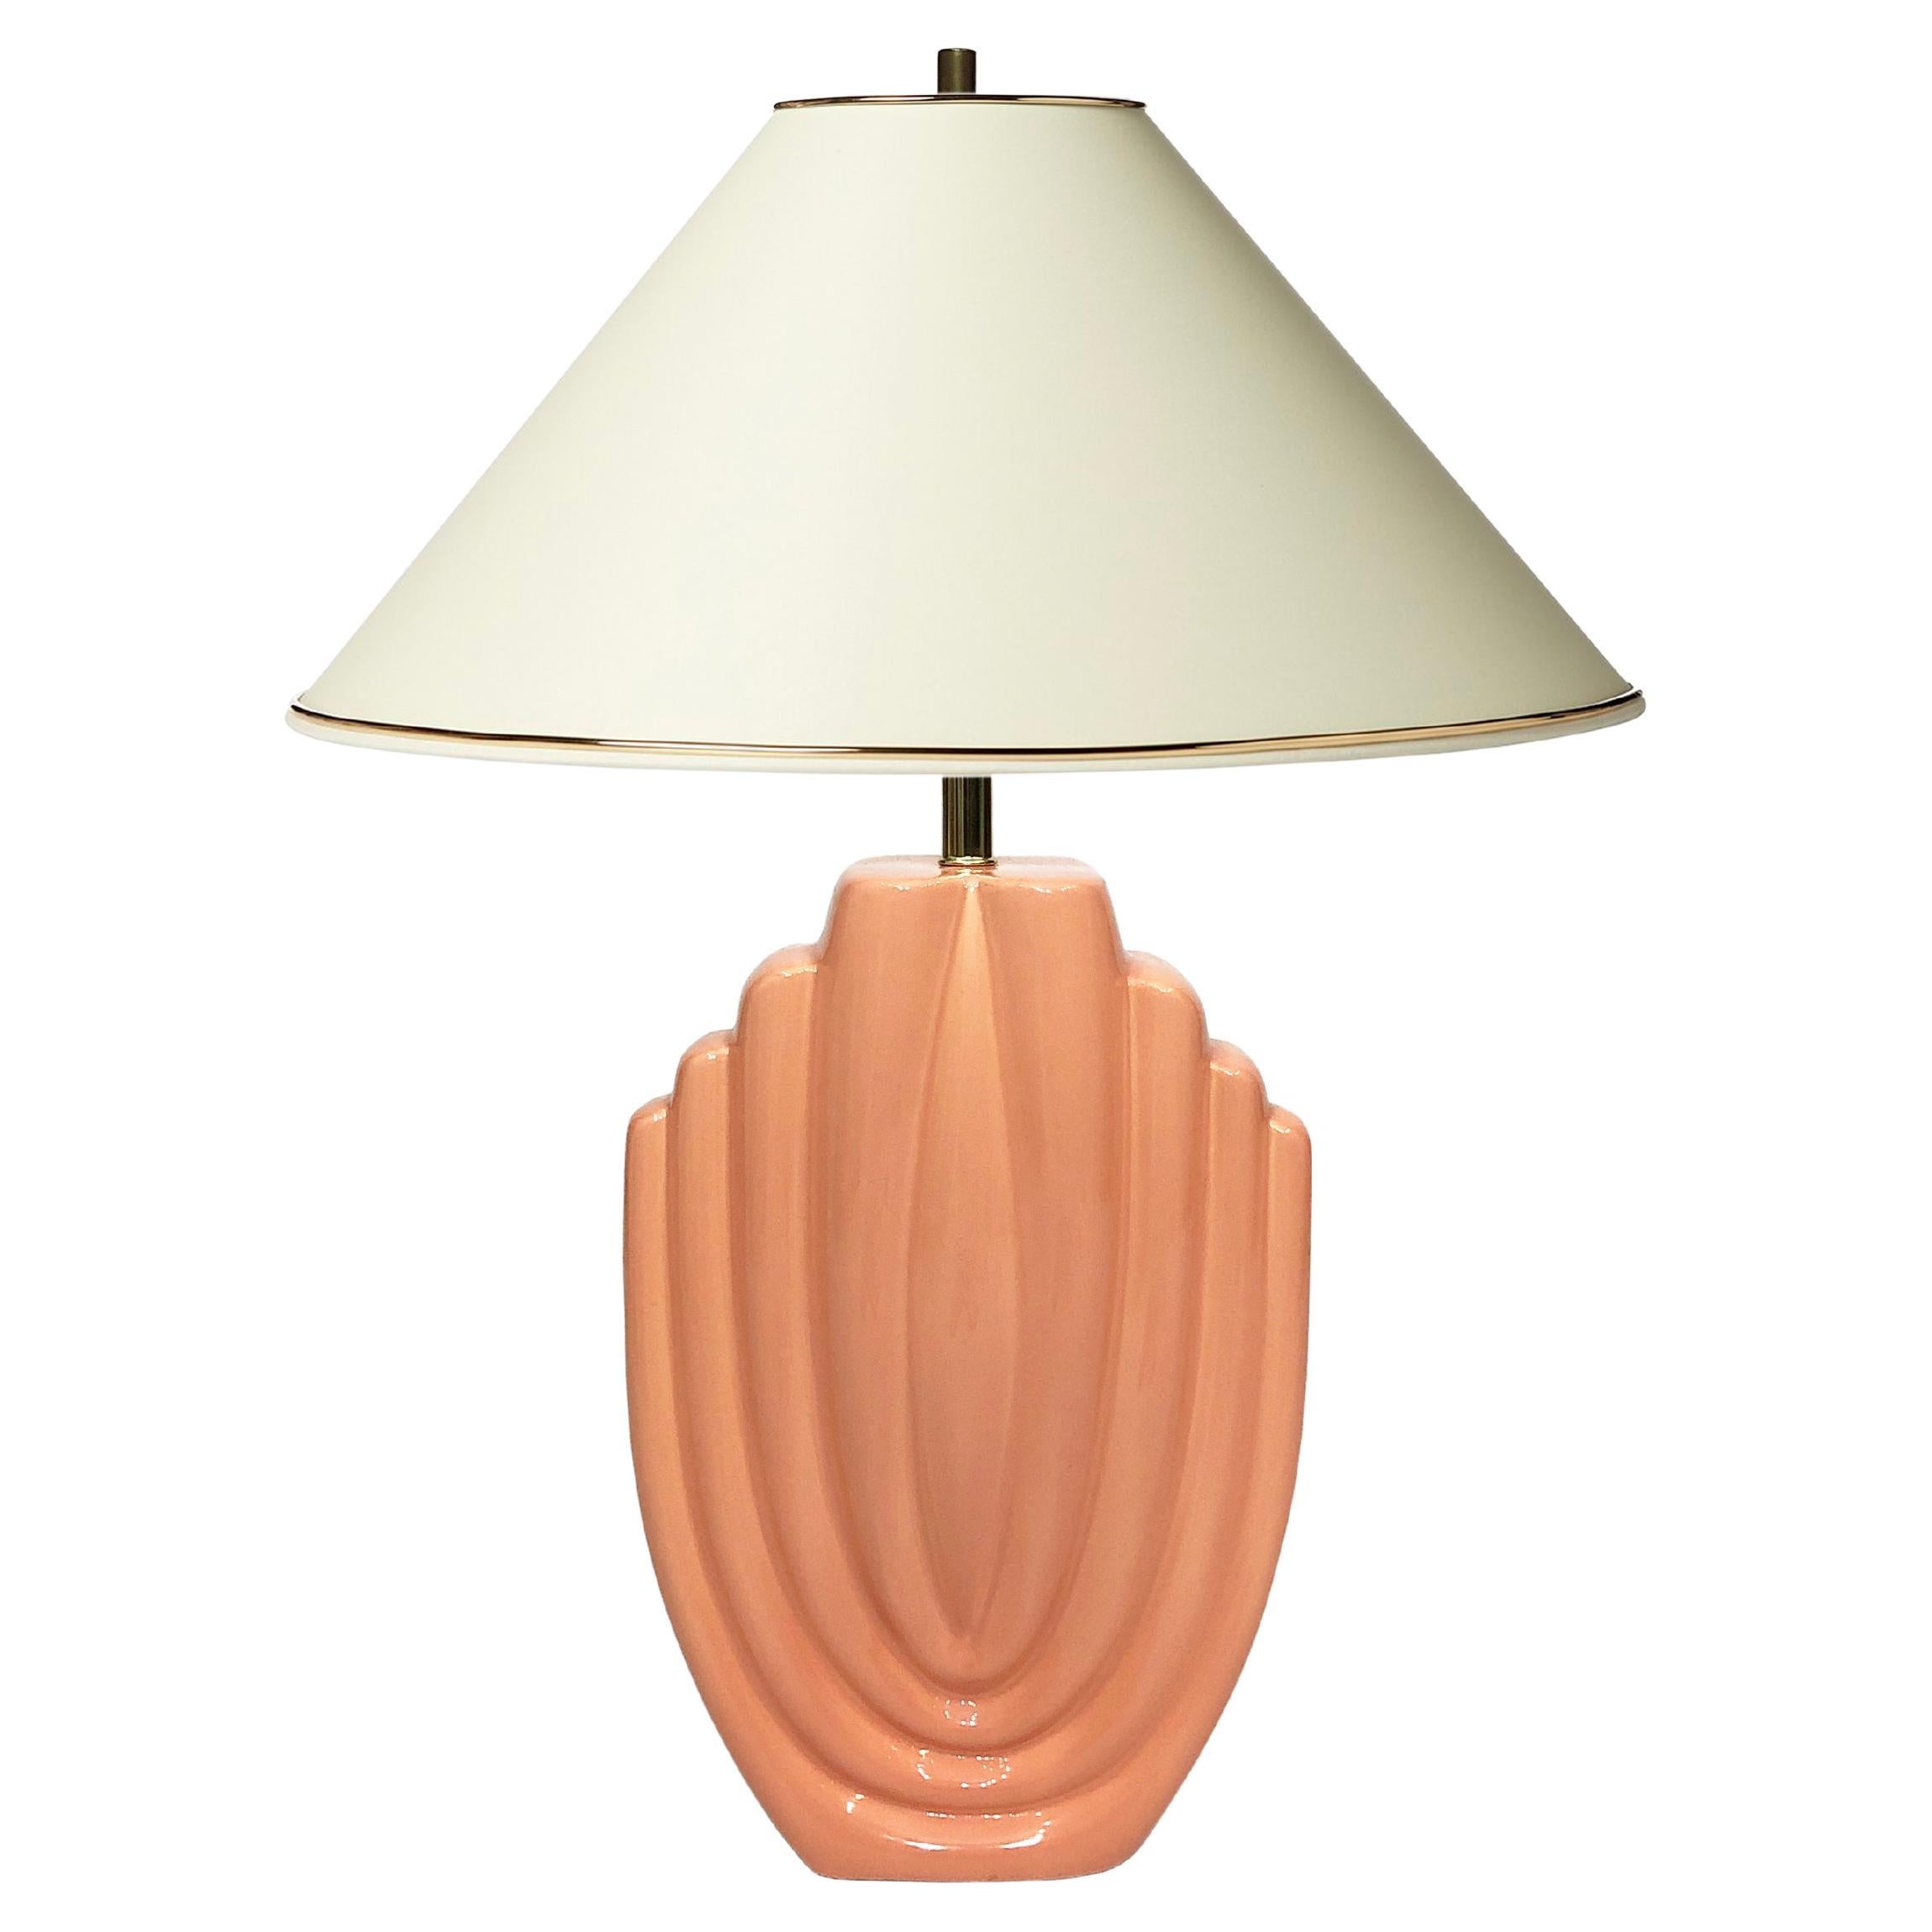 Salmon Pink Ceramic Table Lamp 1970s Art Deco Style Hollywood Regency Pastel For Sale